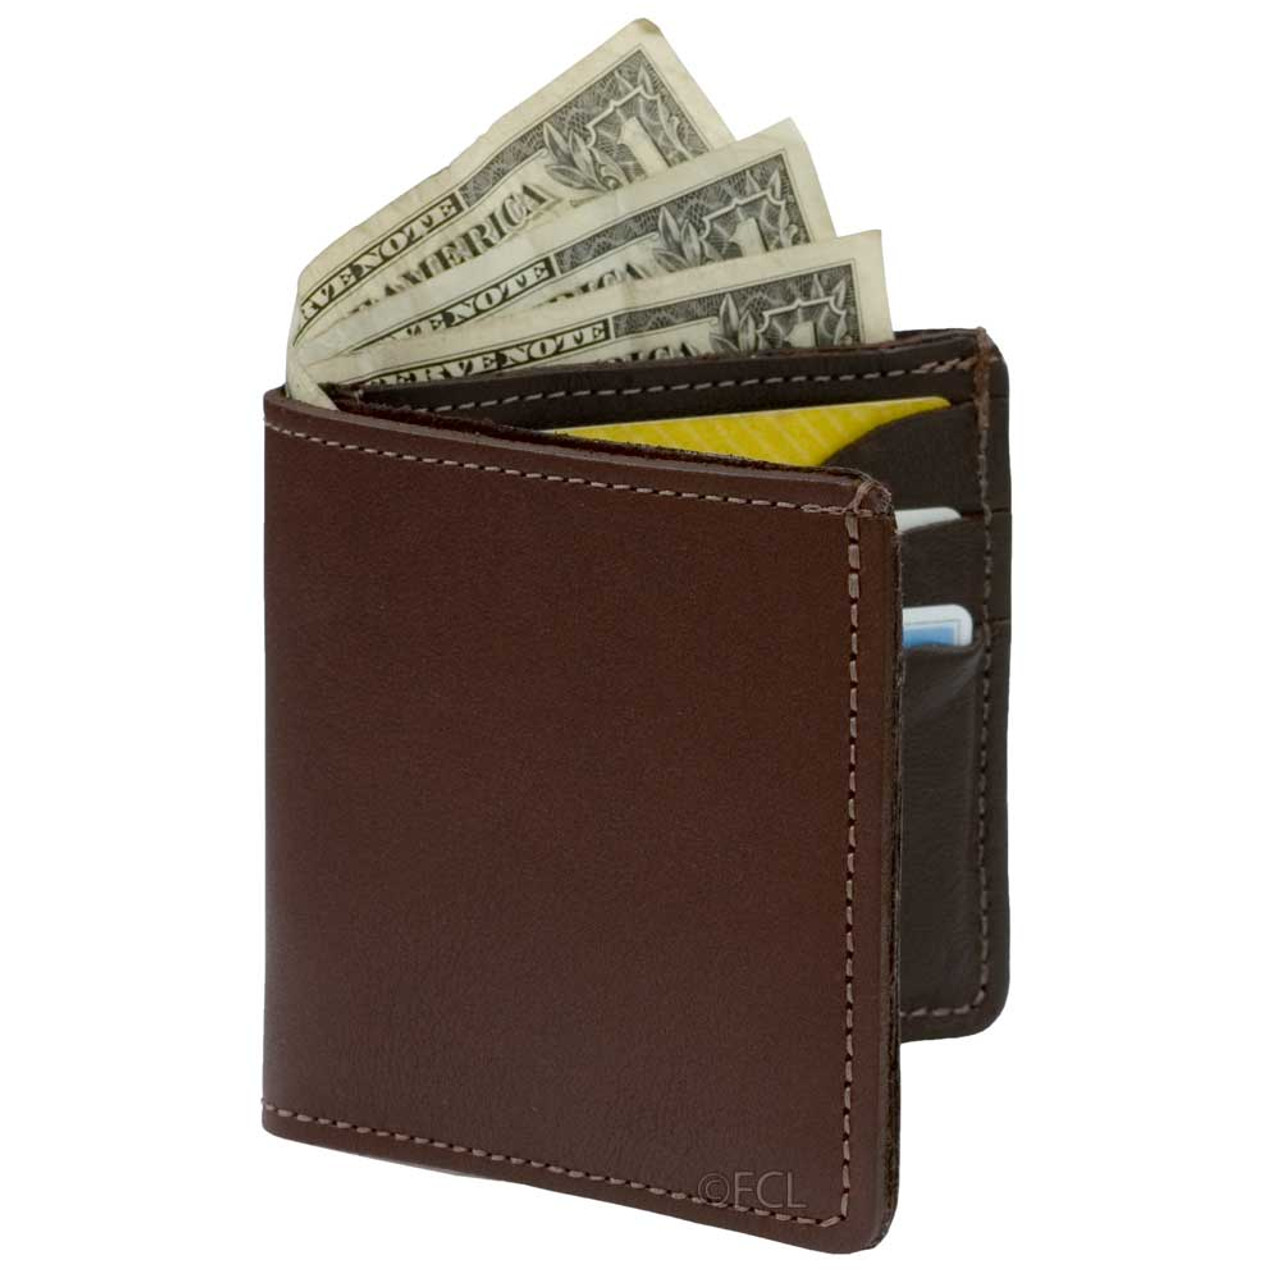 Leather Credit Card Wallet - Fox Creek Leather